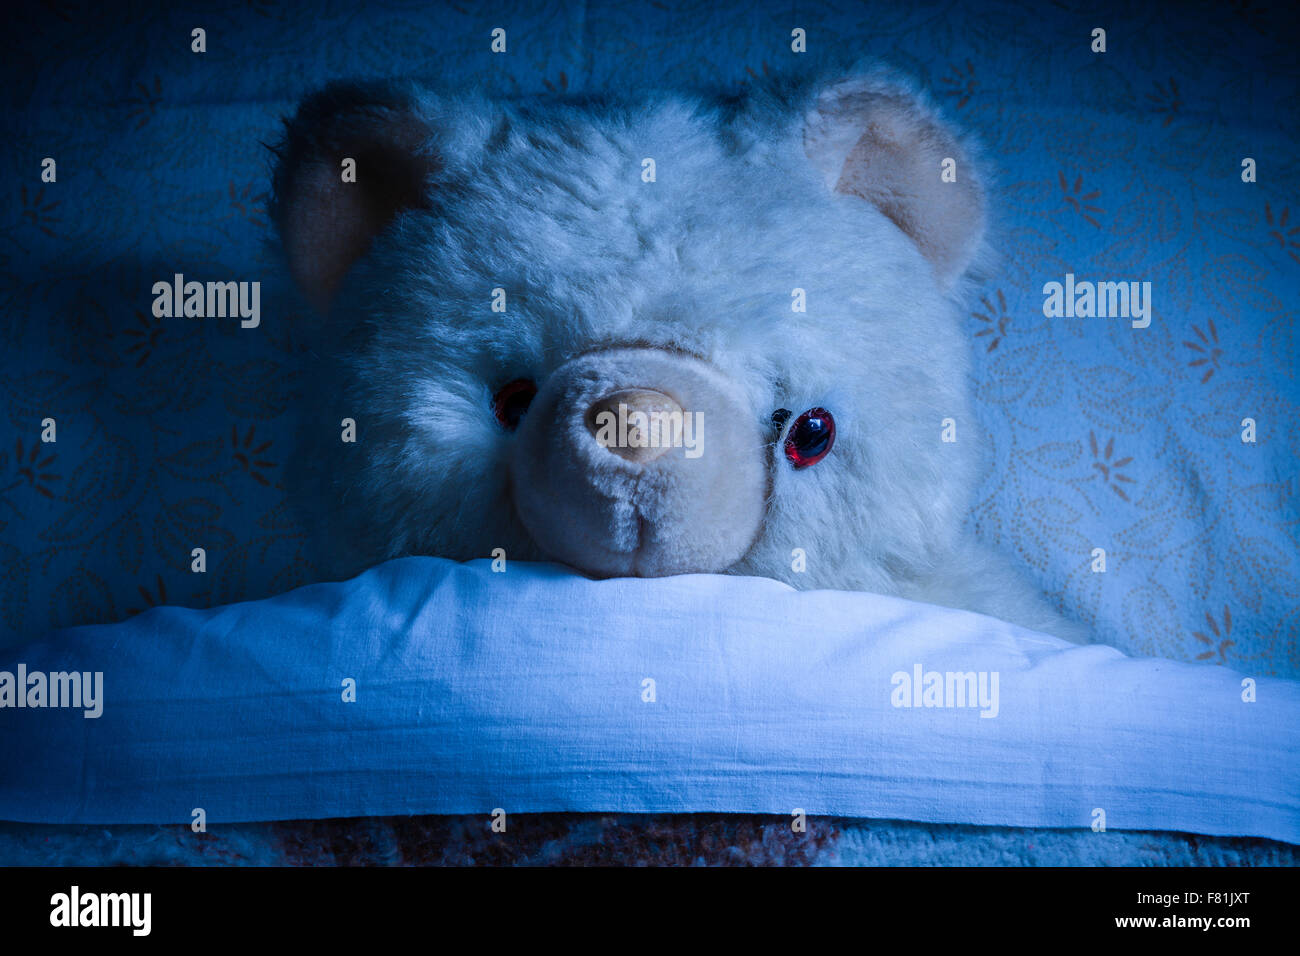 Ruined Old Teddy Bear Laying on a Bed at Night Stock Photo